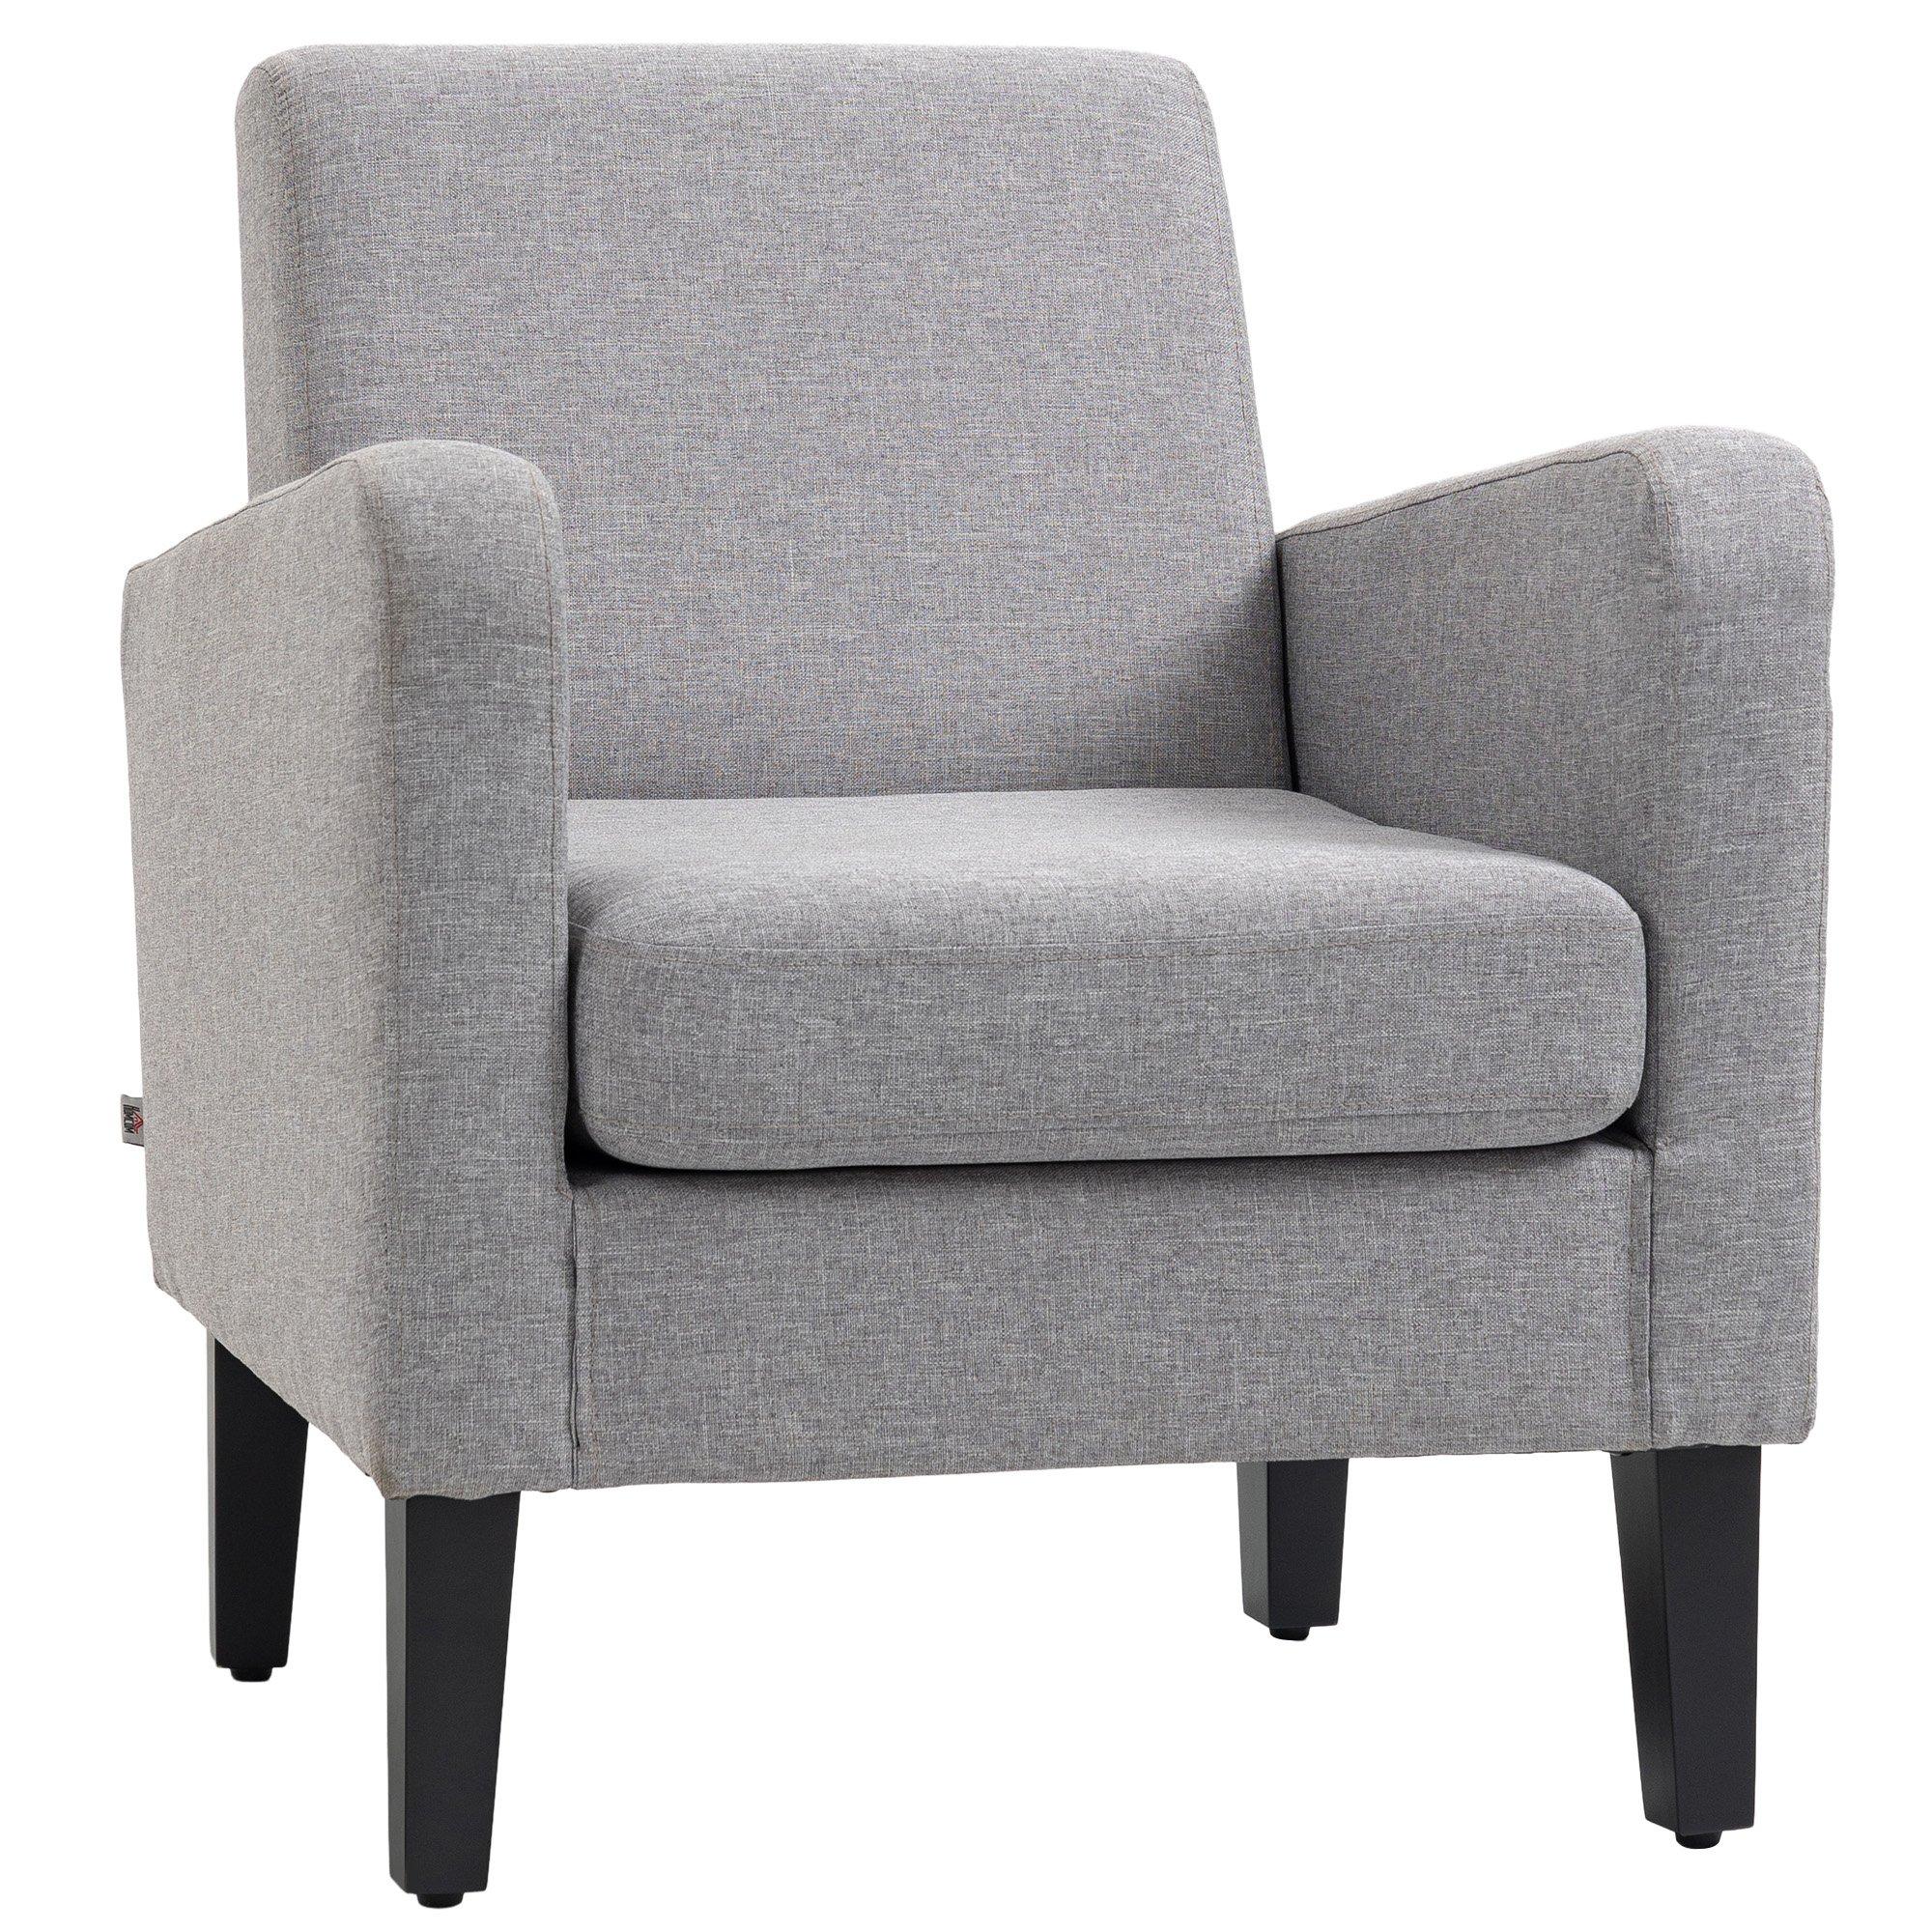 Linen Modern Curved Armchair Accent Seat with Thick Cushion Wood Legs